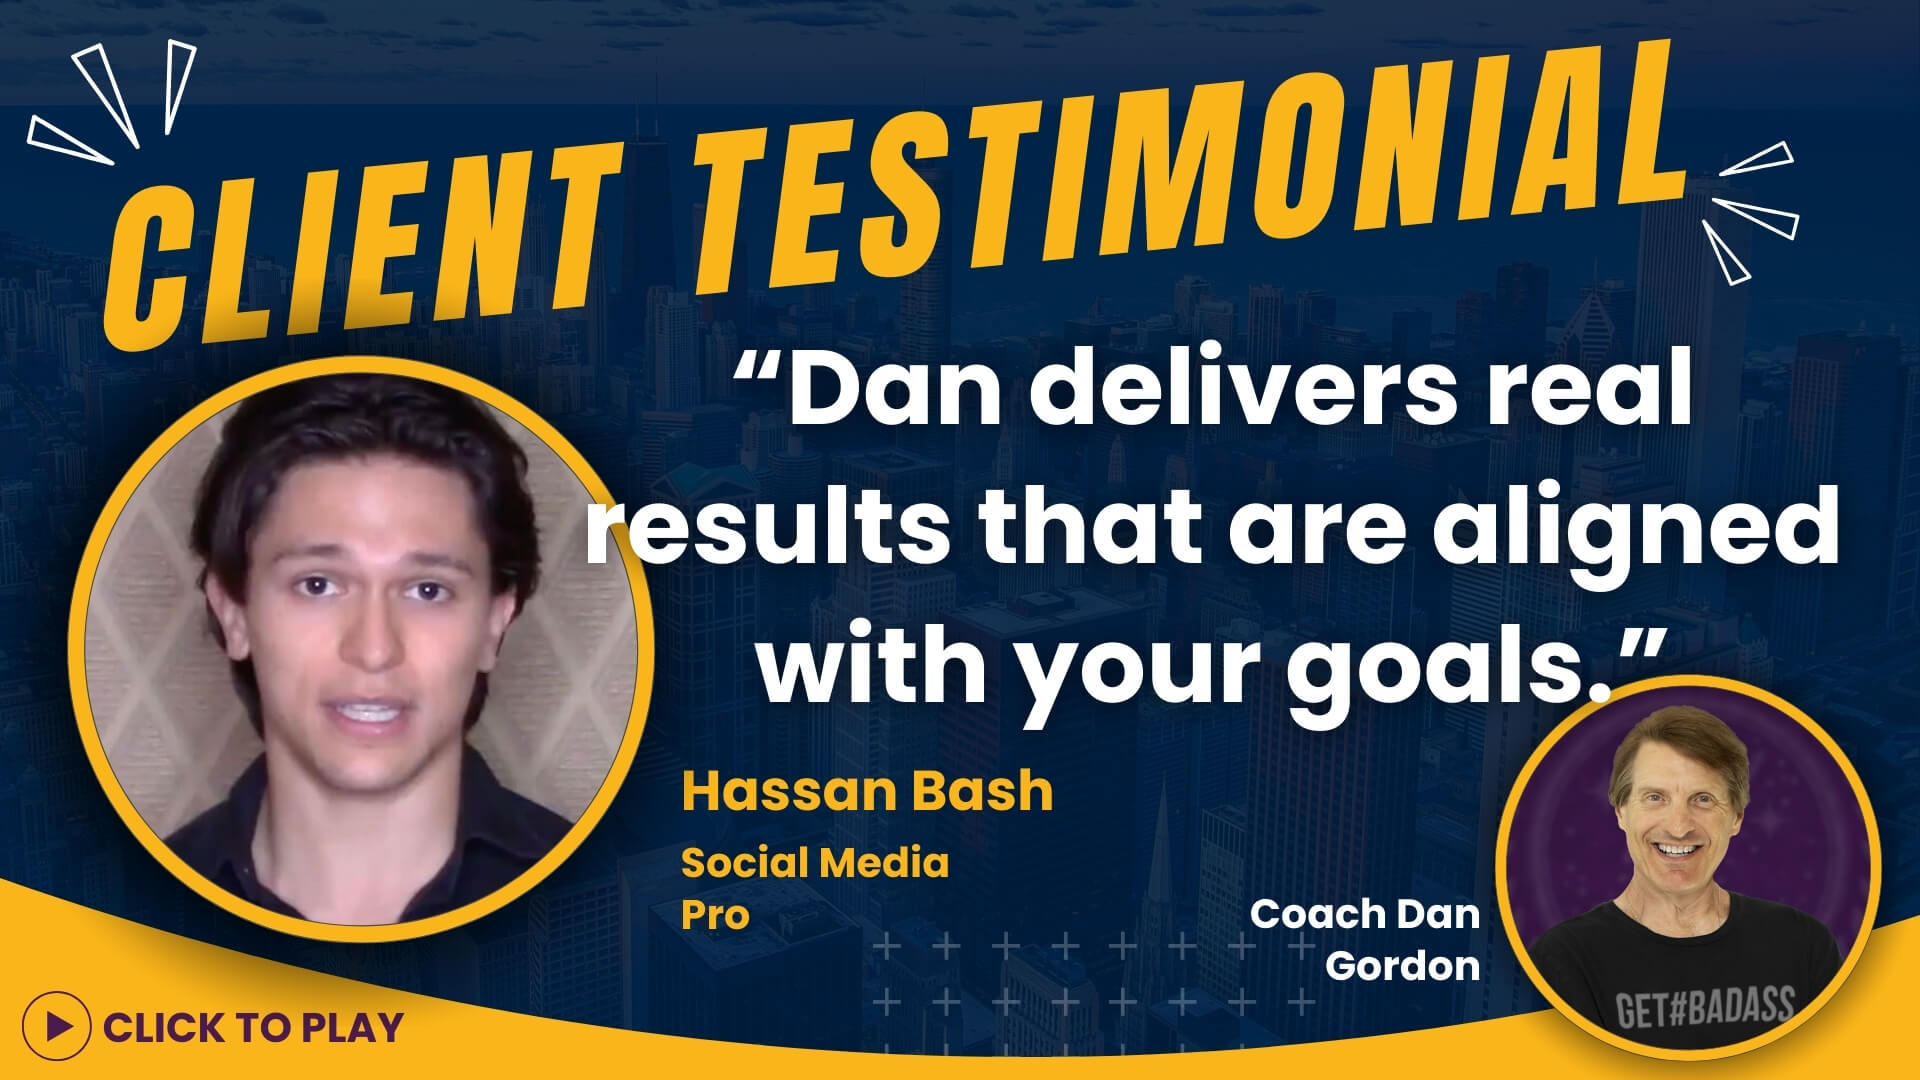 Hassan Bash, in a professional setting, endorsing Coach Dan Gordon, with text highlighting the results-oriented guidance he received.